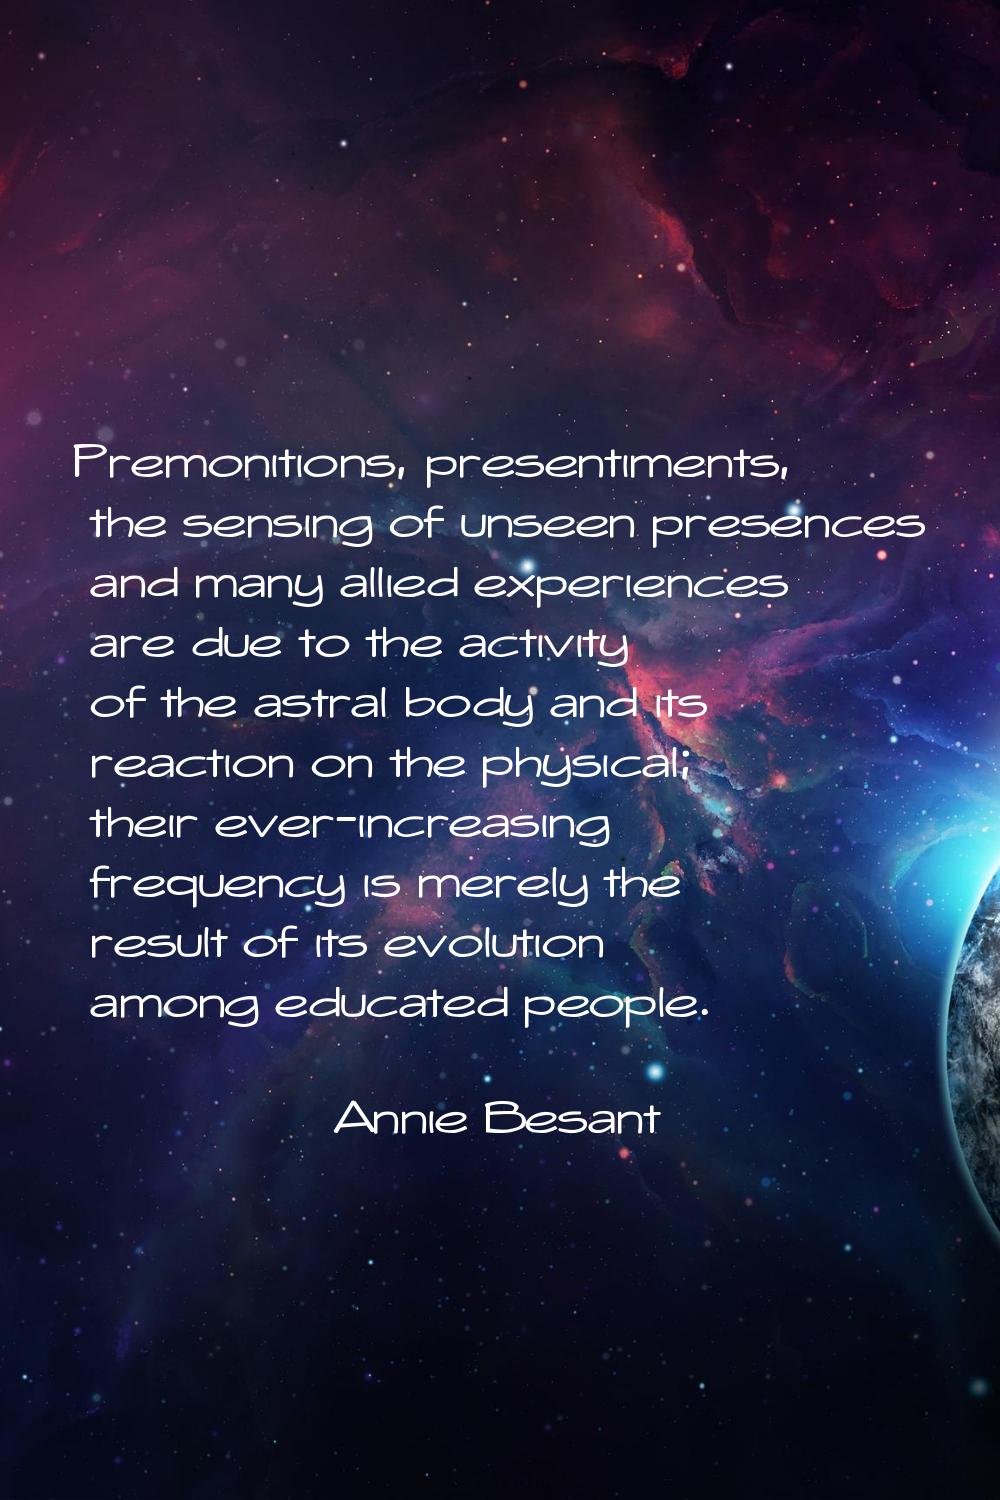 Premonitions, presentiments, the sensing of unseen presences and many allied experiences are due to